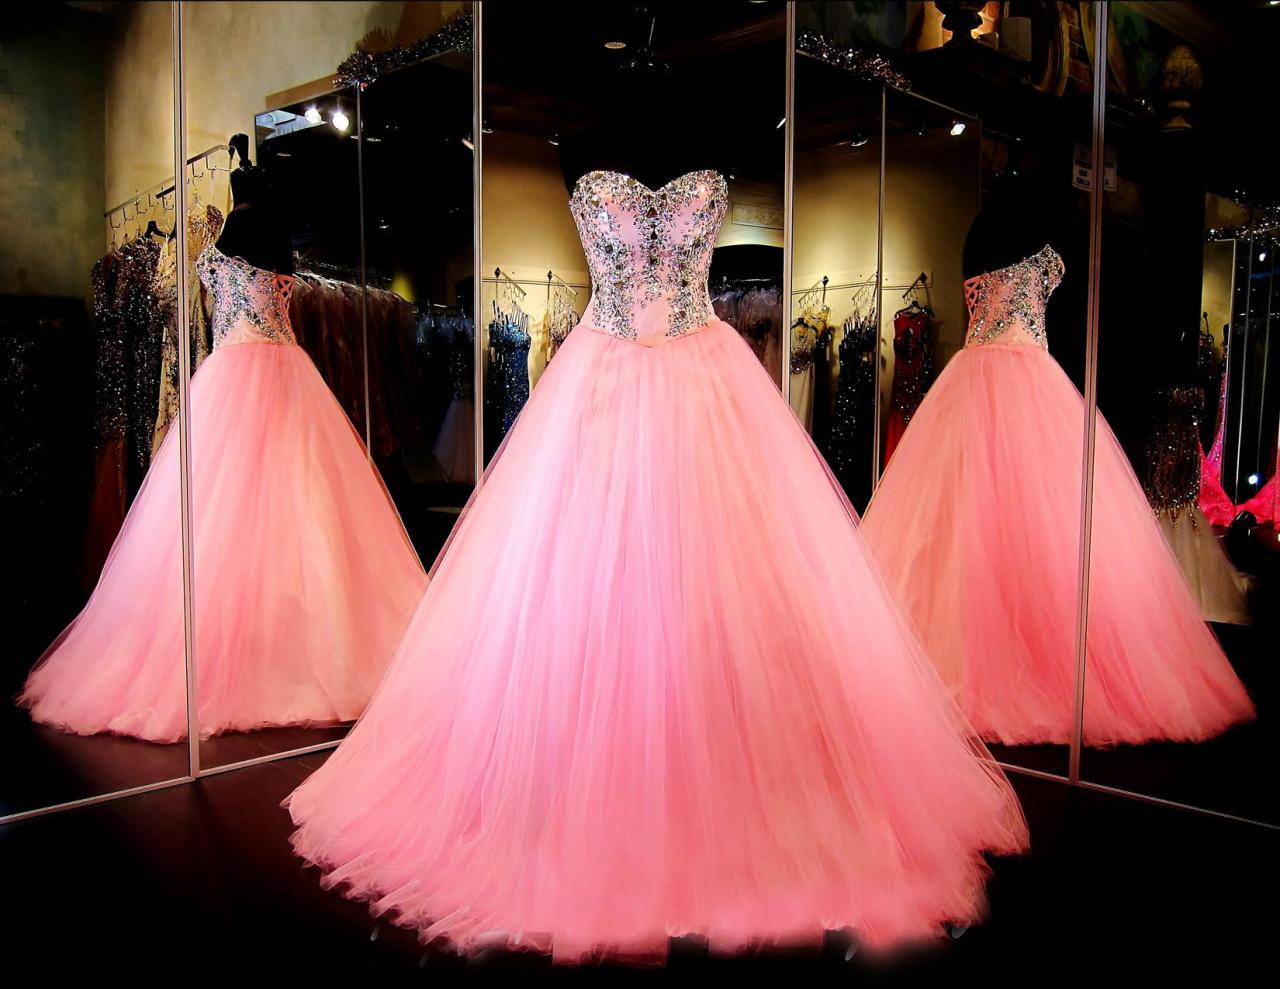 Custom Sweetheart Beaded Ball Gown Tulle Pink Prom Dresses, Long Prom Dress, Prom Dress, Prom Dress 2017, Affordable Prom Dress, Junior Prom